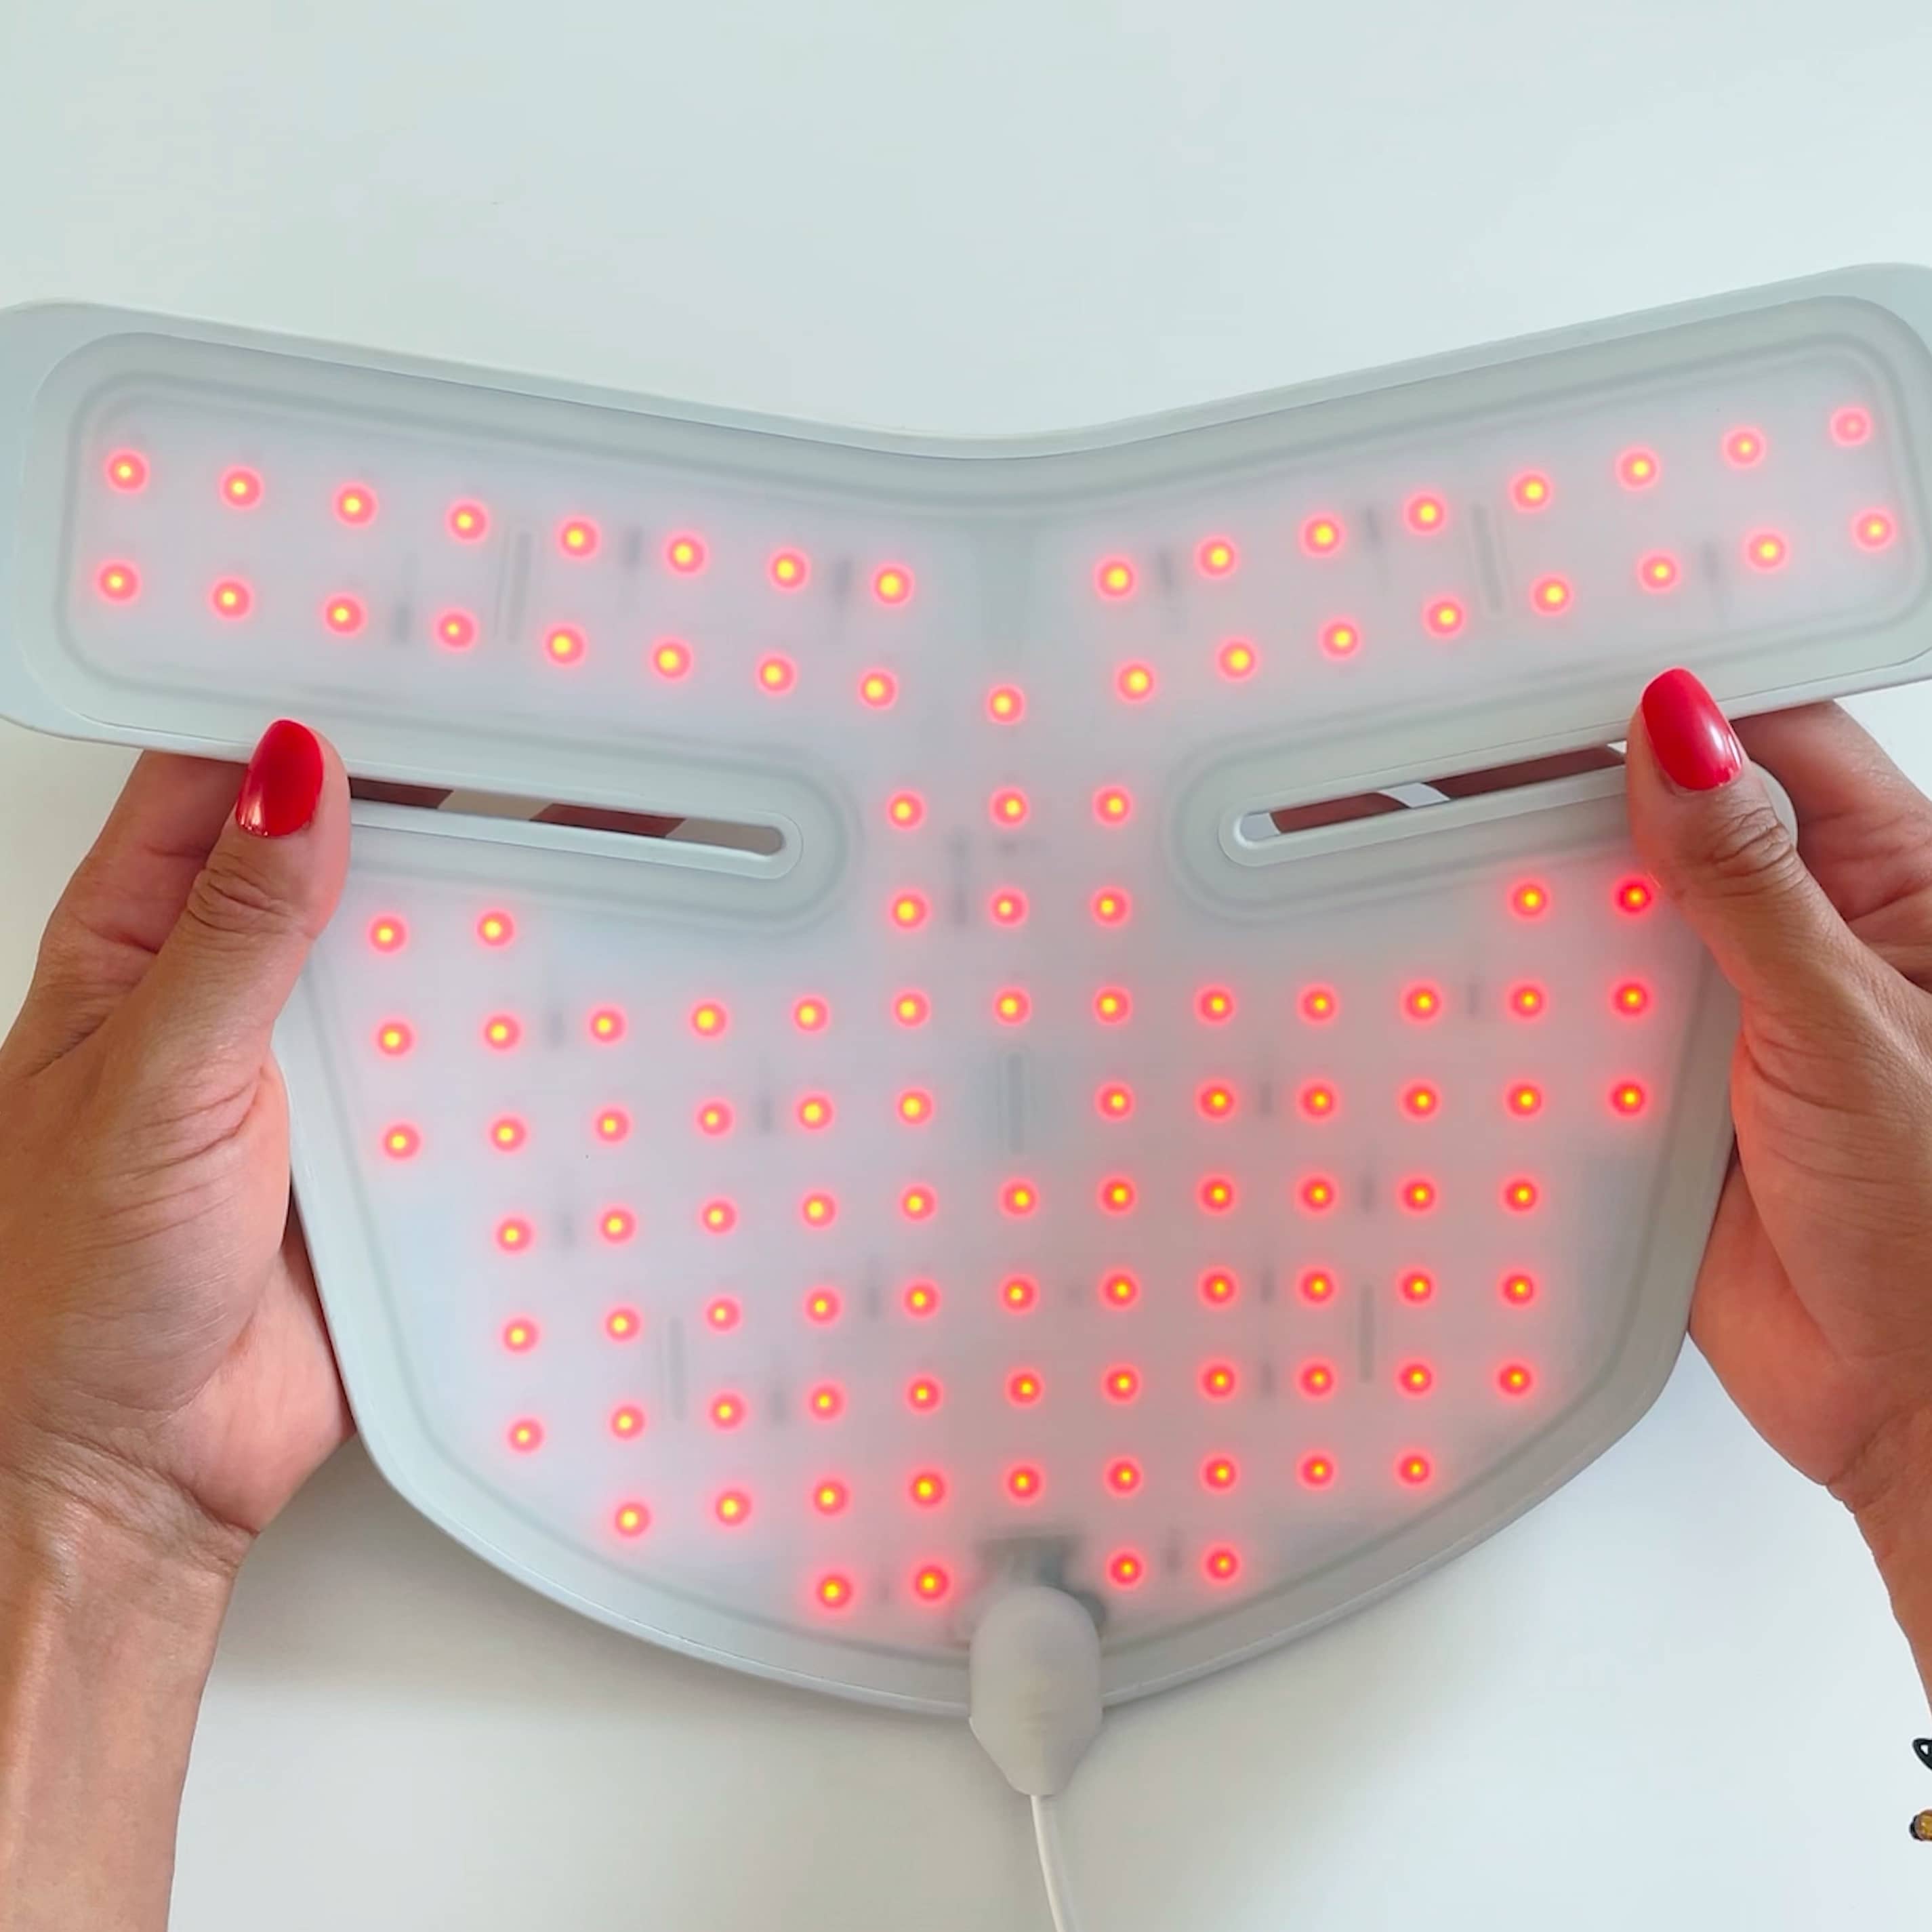 led light therapy at home nz